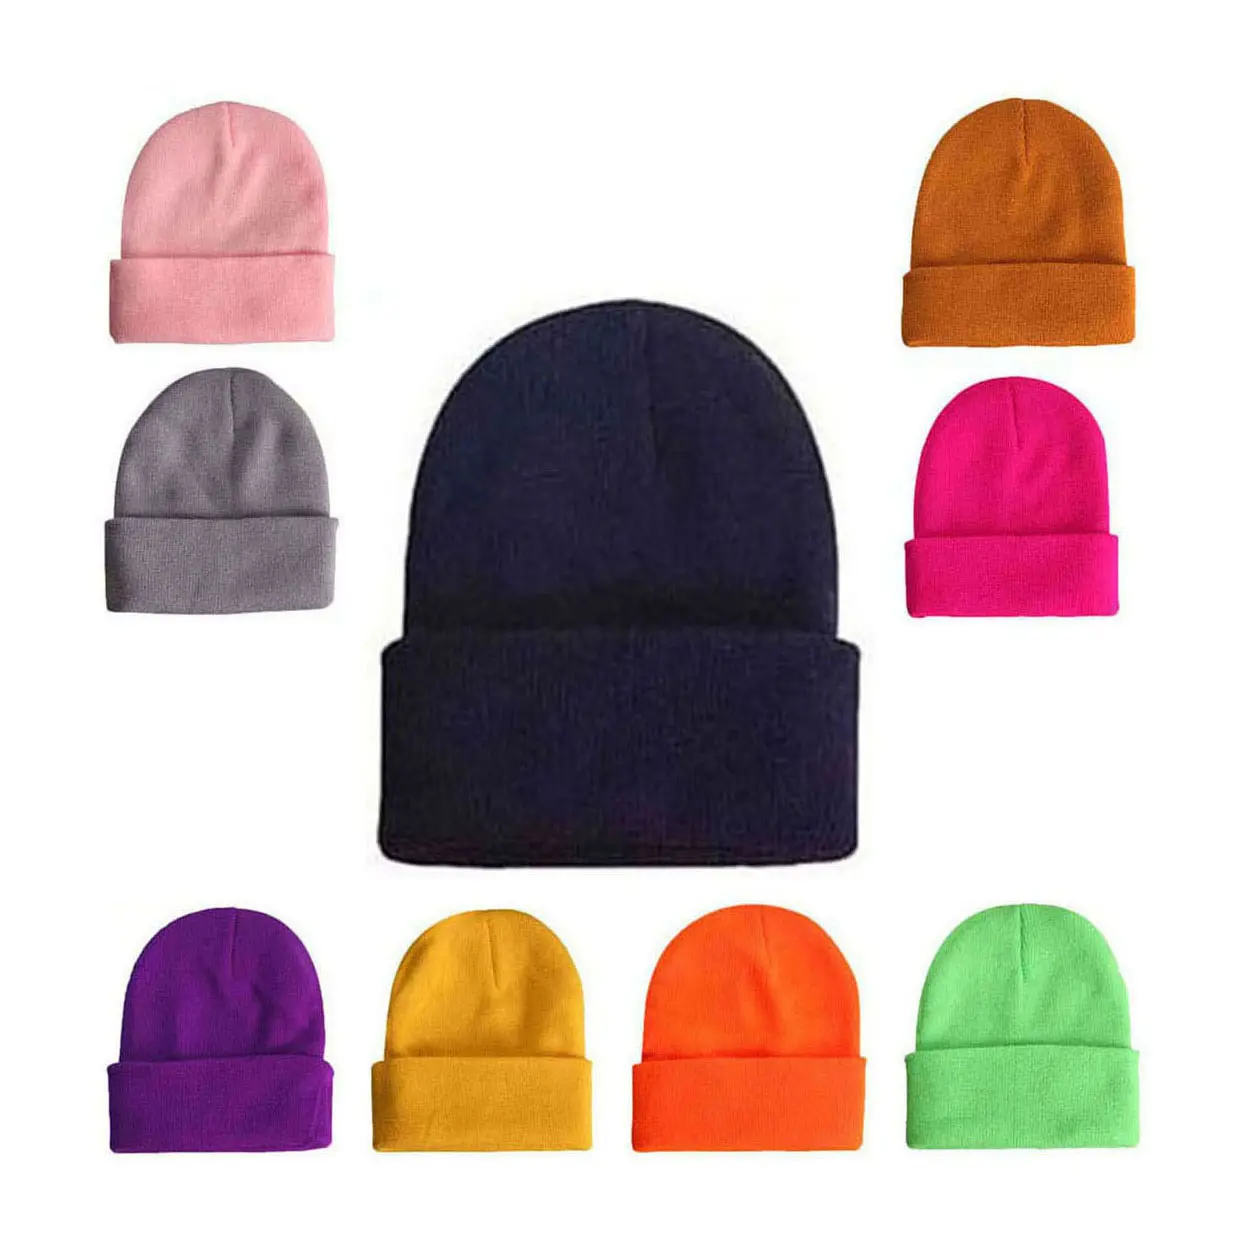 Knitting Solid Color Unisex Beanie Keep Warm Fashion New Hip Hop Winter Hat Skullies Soft Knit Skull beanies with custom logo